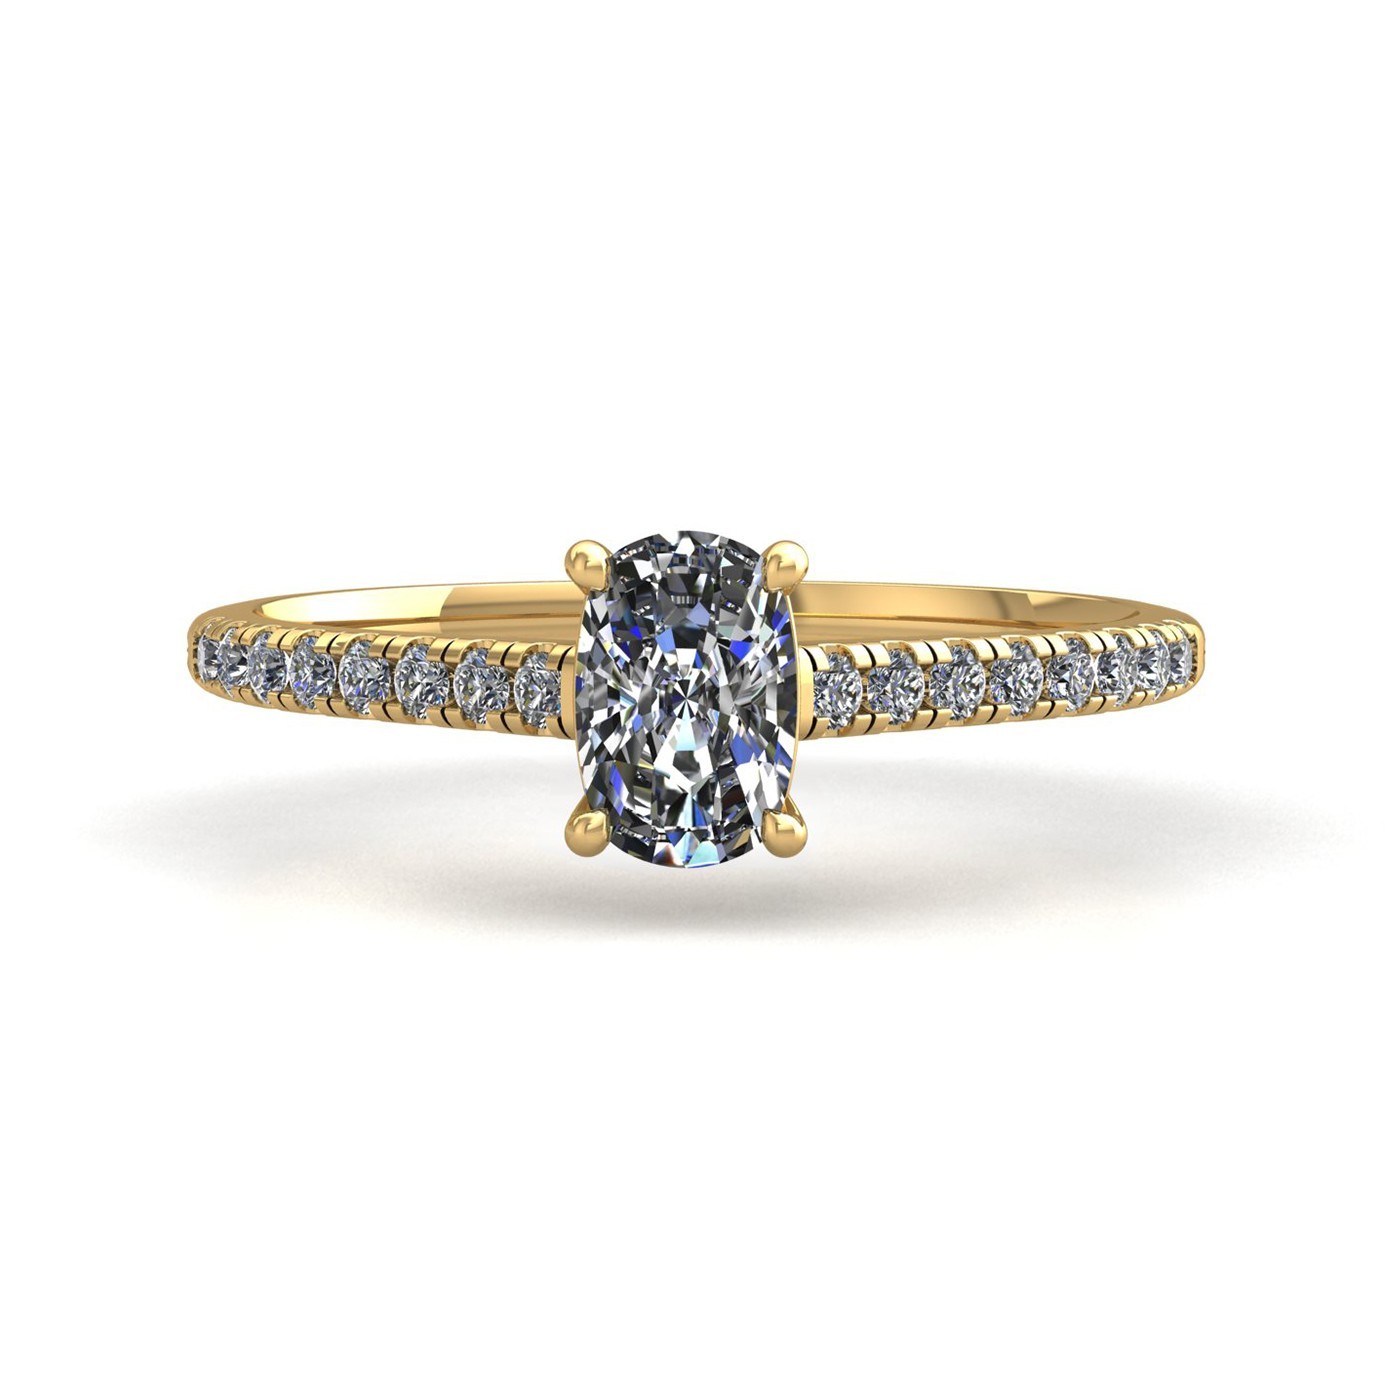 18k yellow gold 0,30 ct 4 prongs cushion cut diamond engagement ring with whisper thin pavÉ set band Photos & images